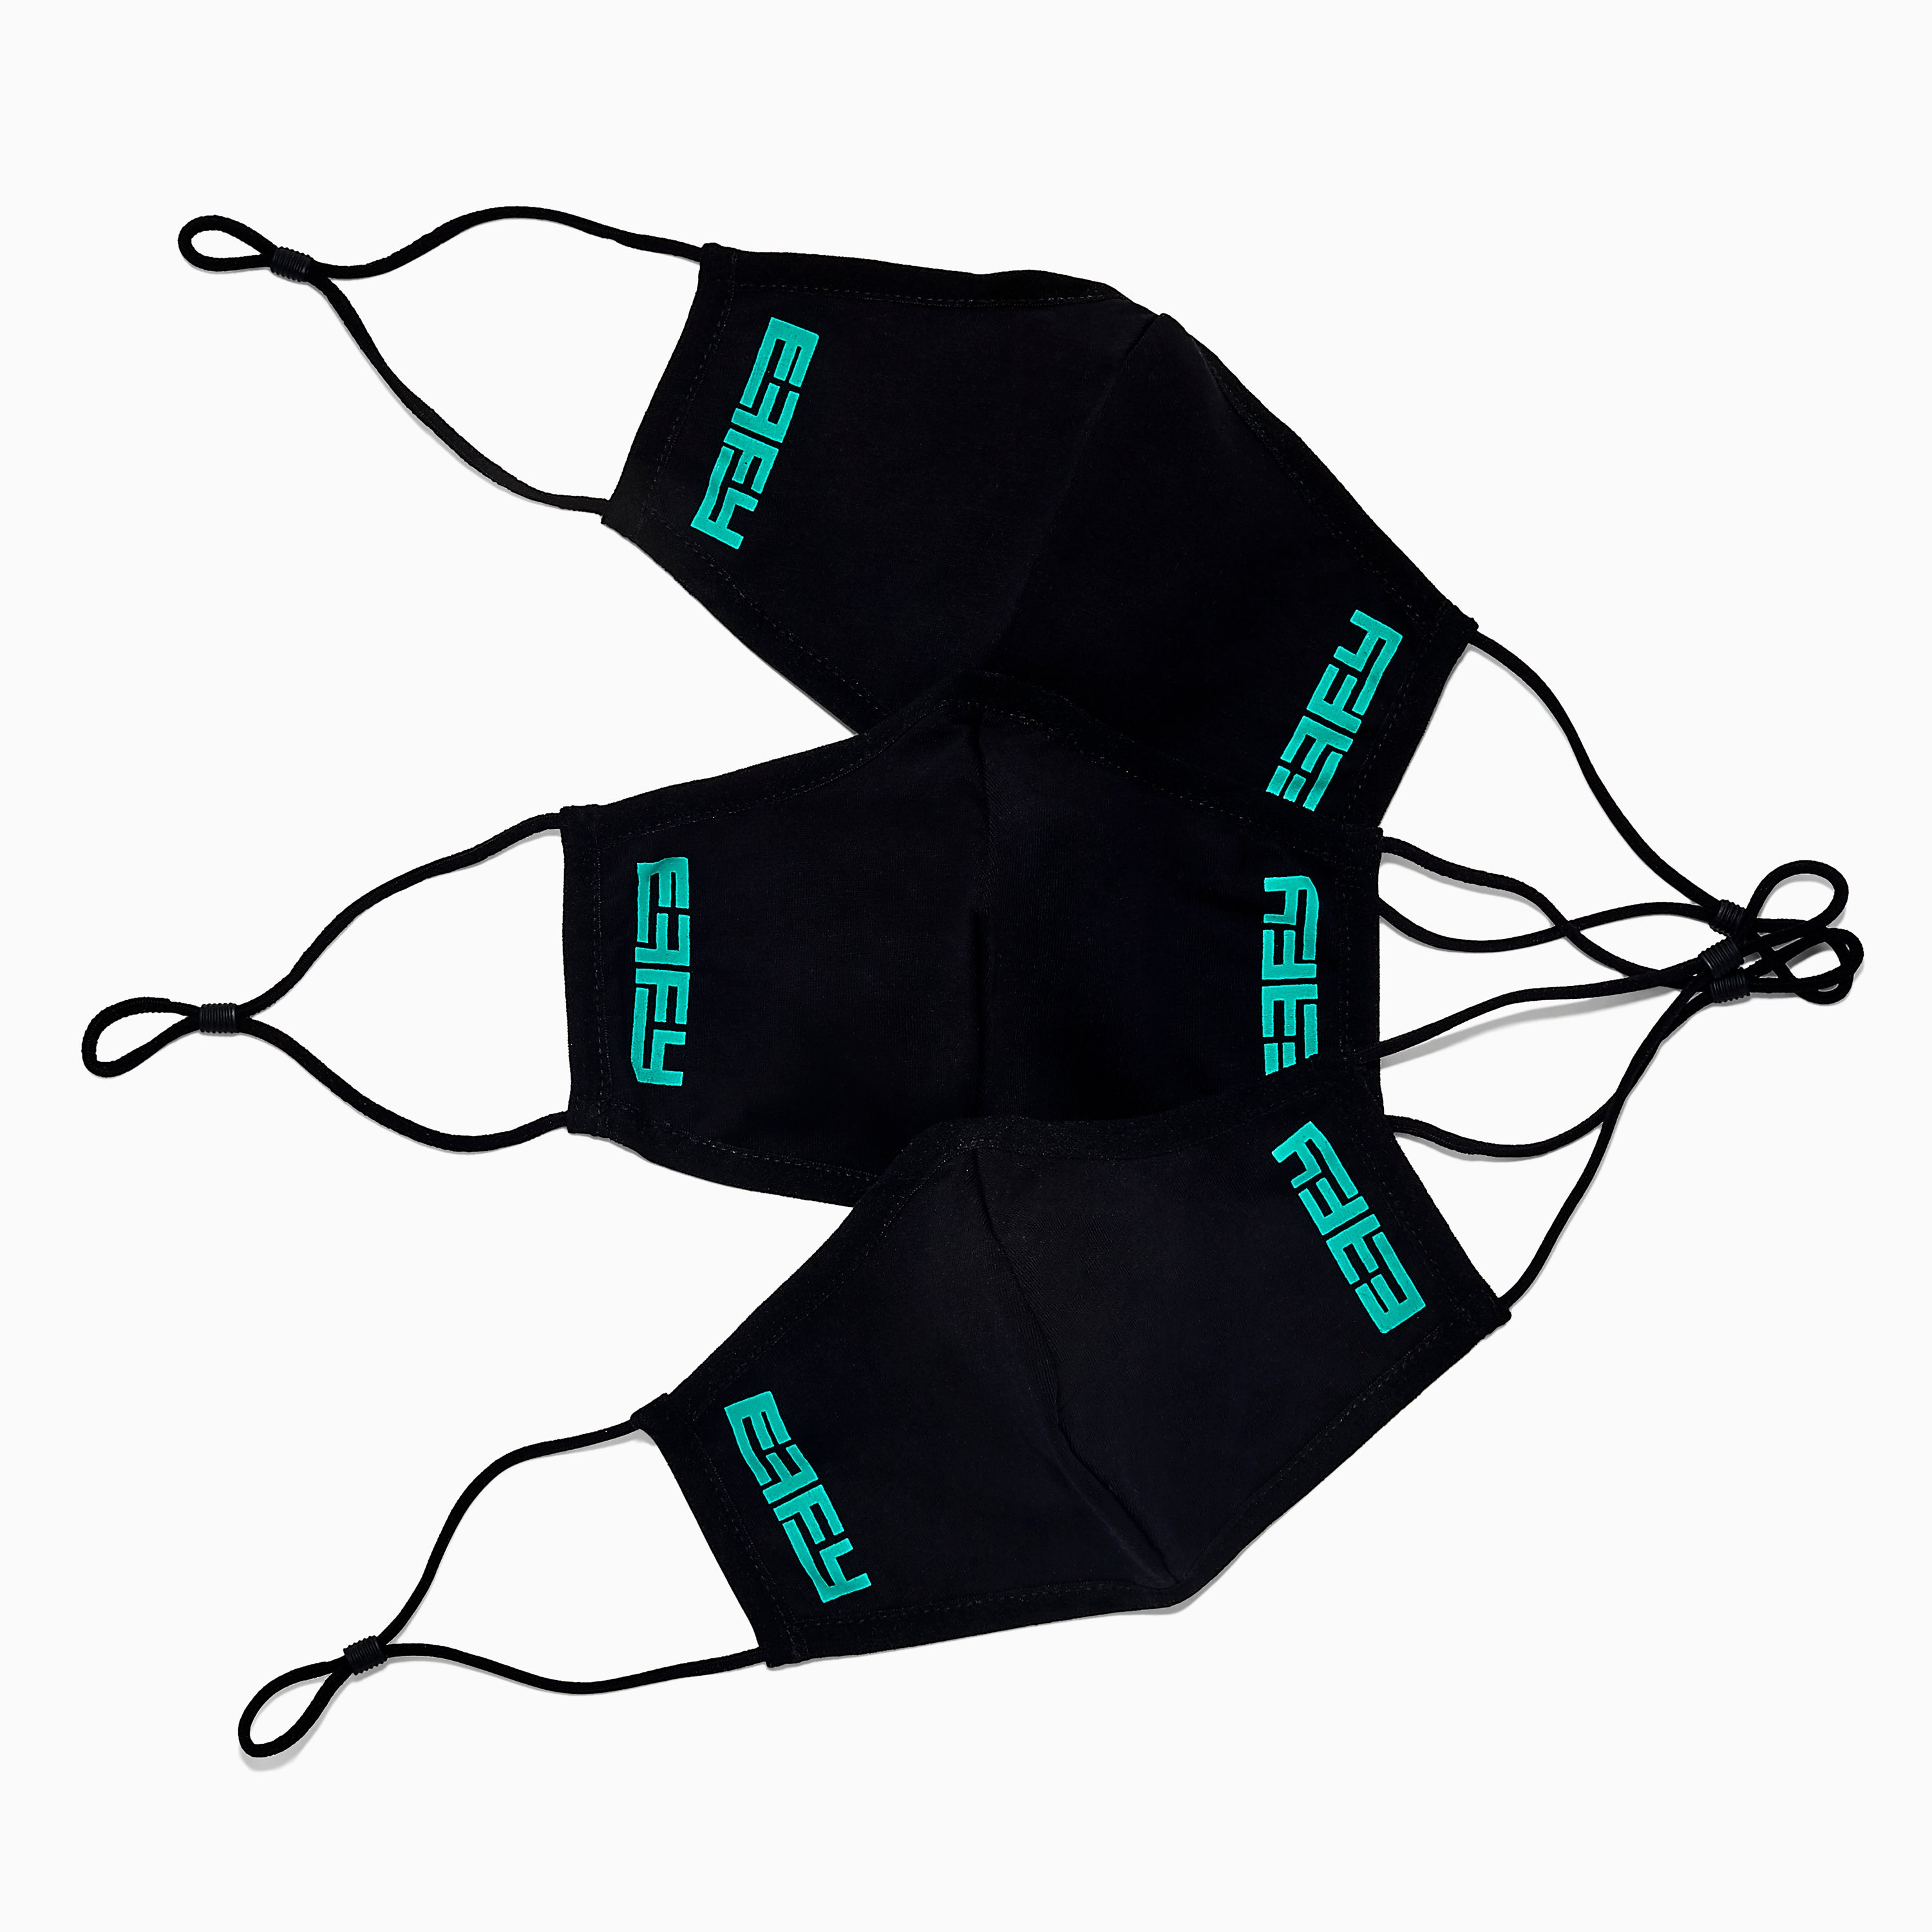 Effy Knitted Face Mask - Adult 3 Pack - Black with Teal Logo